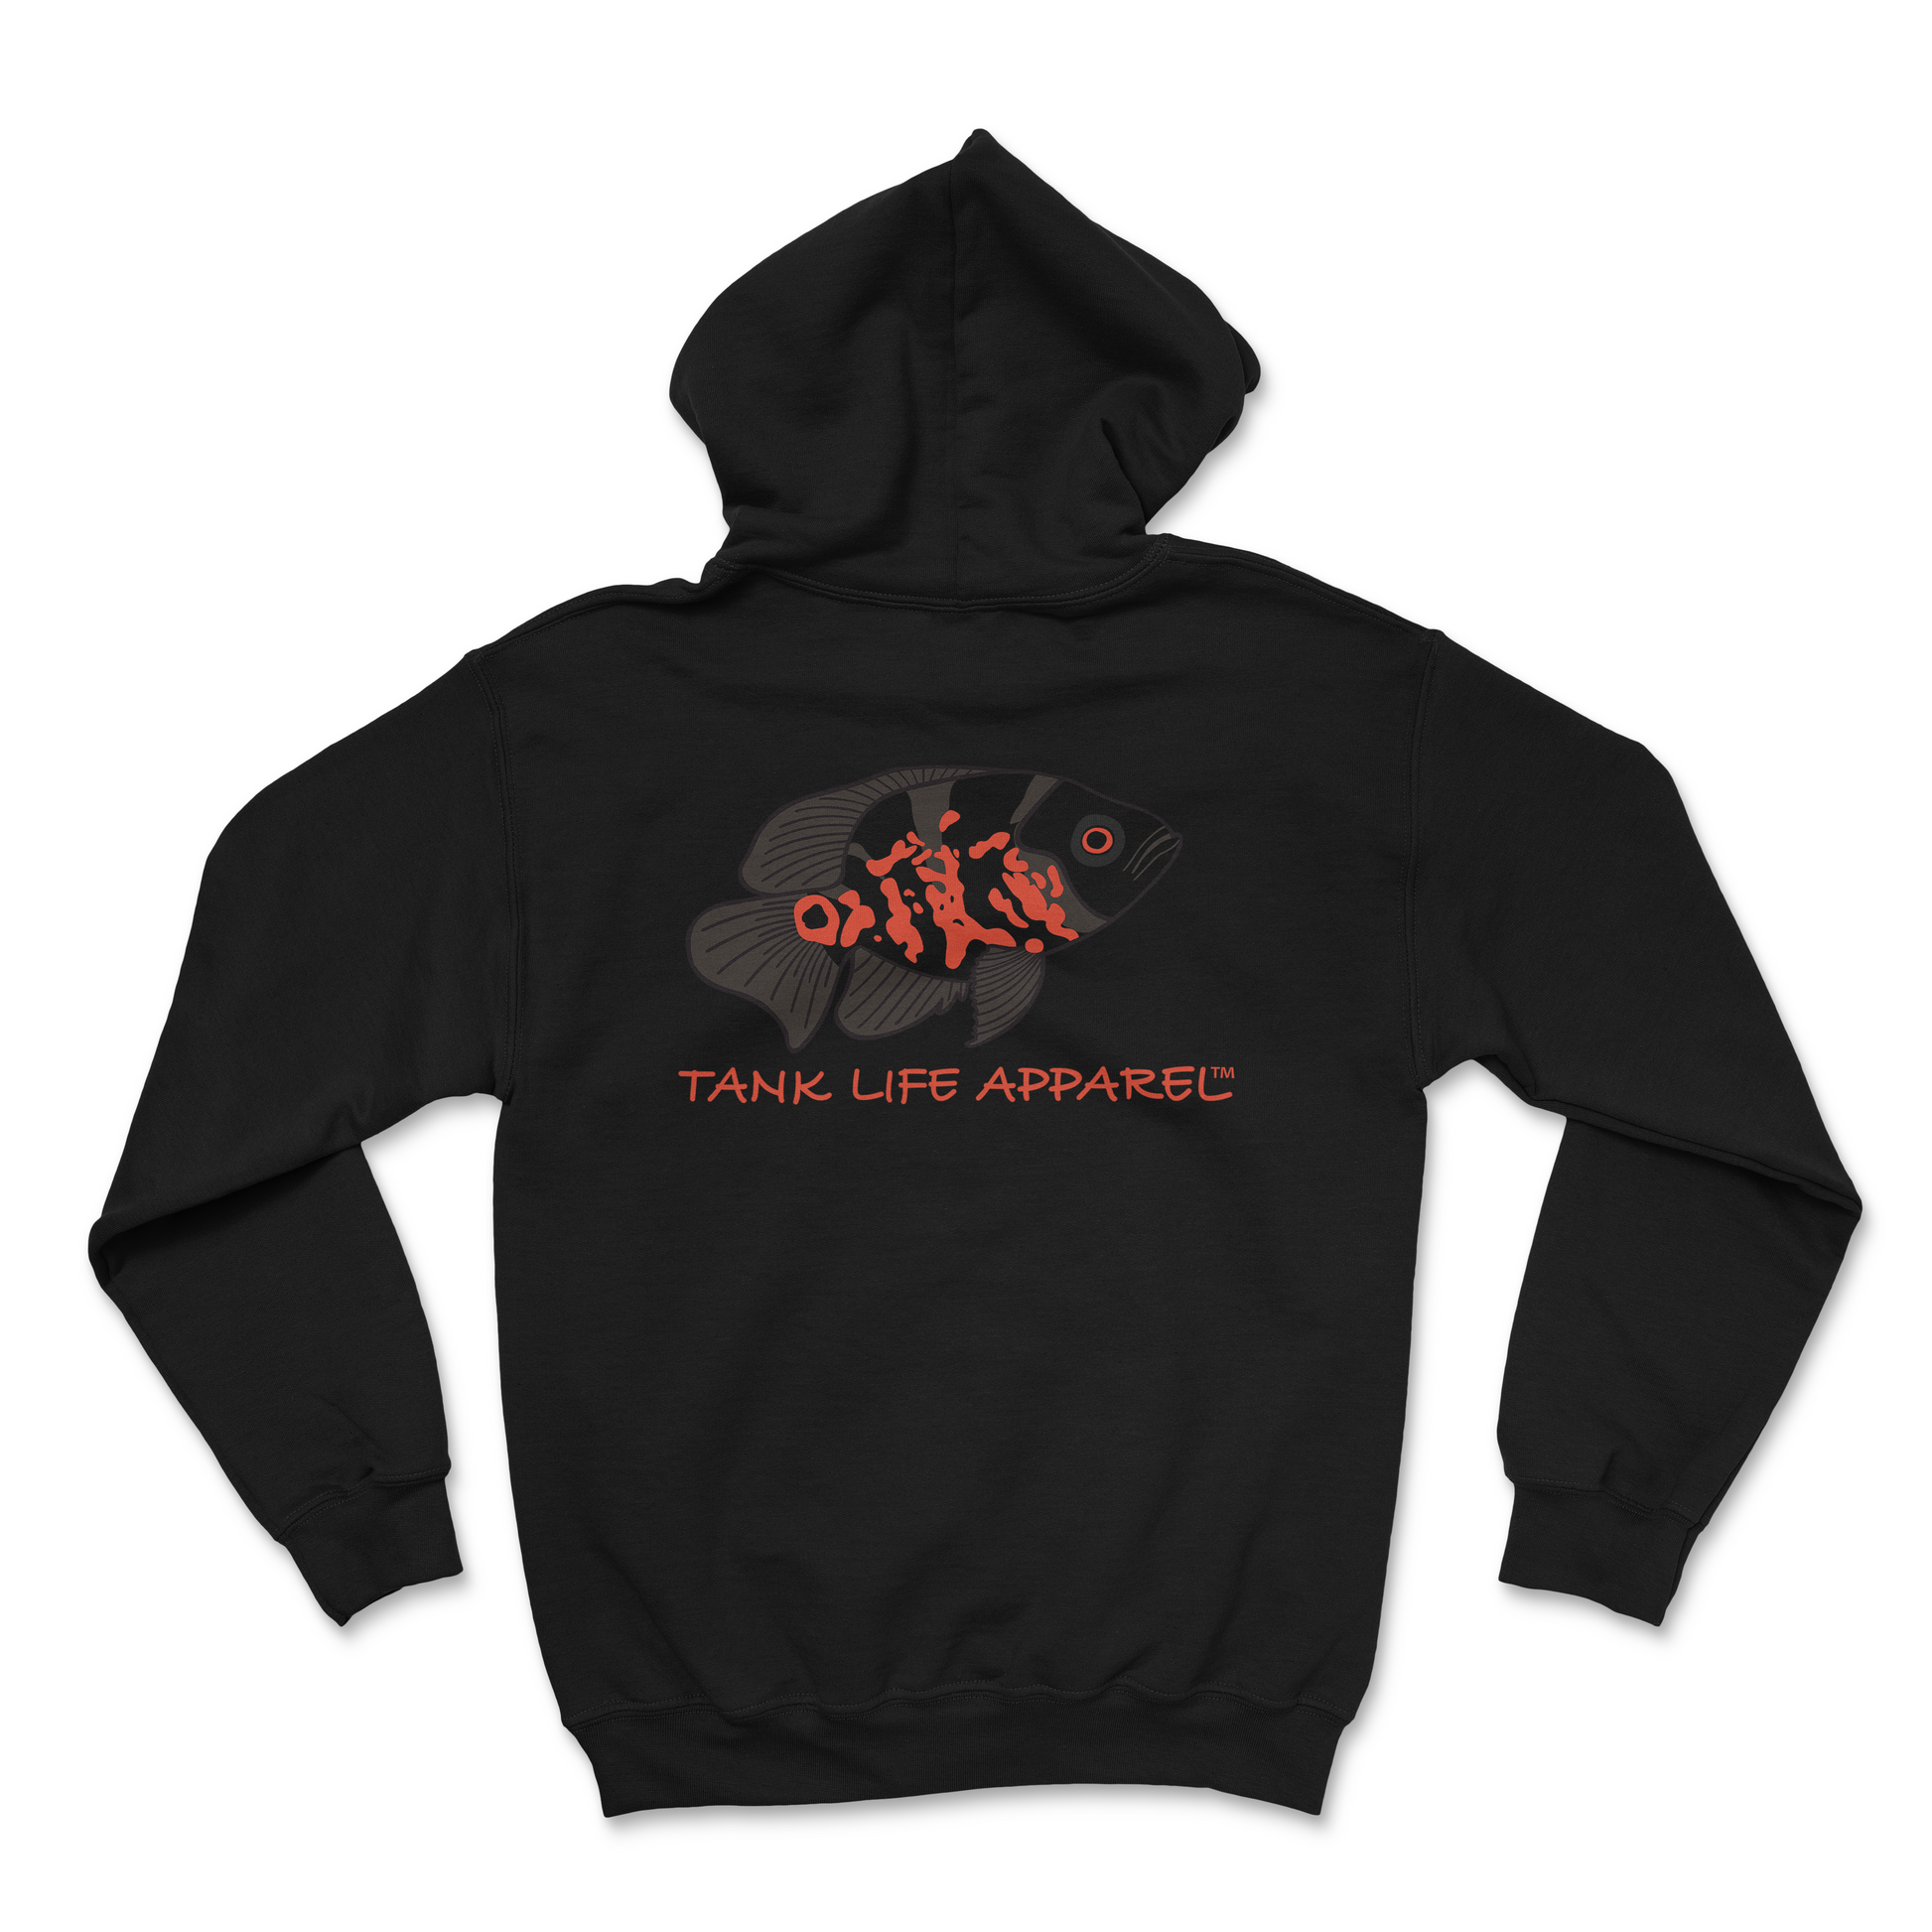 The Tank Life Apparel Tiger Oscar cichlid design on the back of a super soft and comfortable hoodie. Black and gray with orange fish.